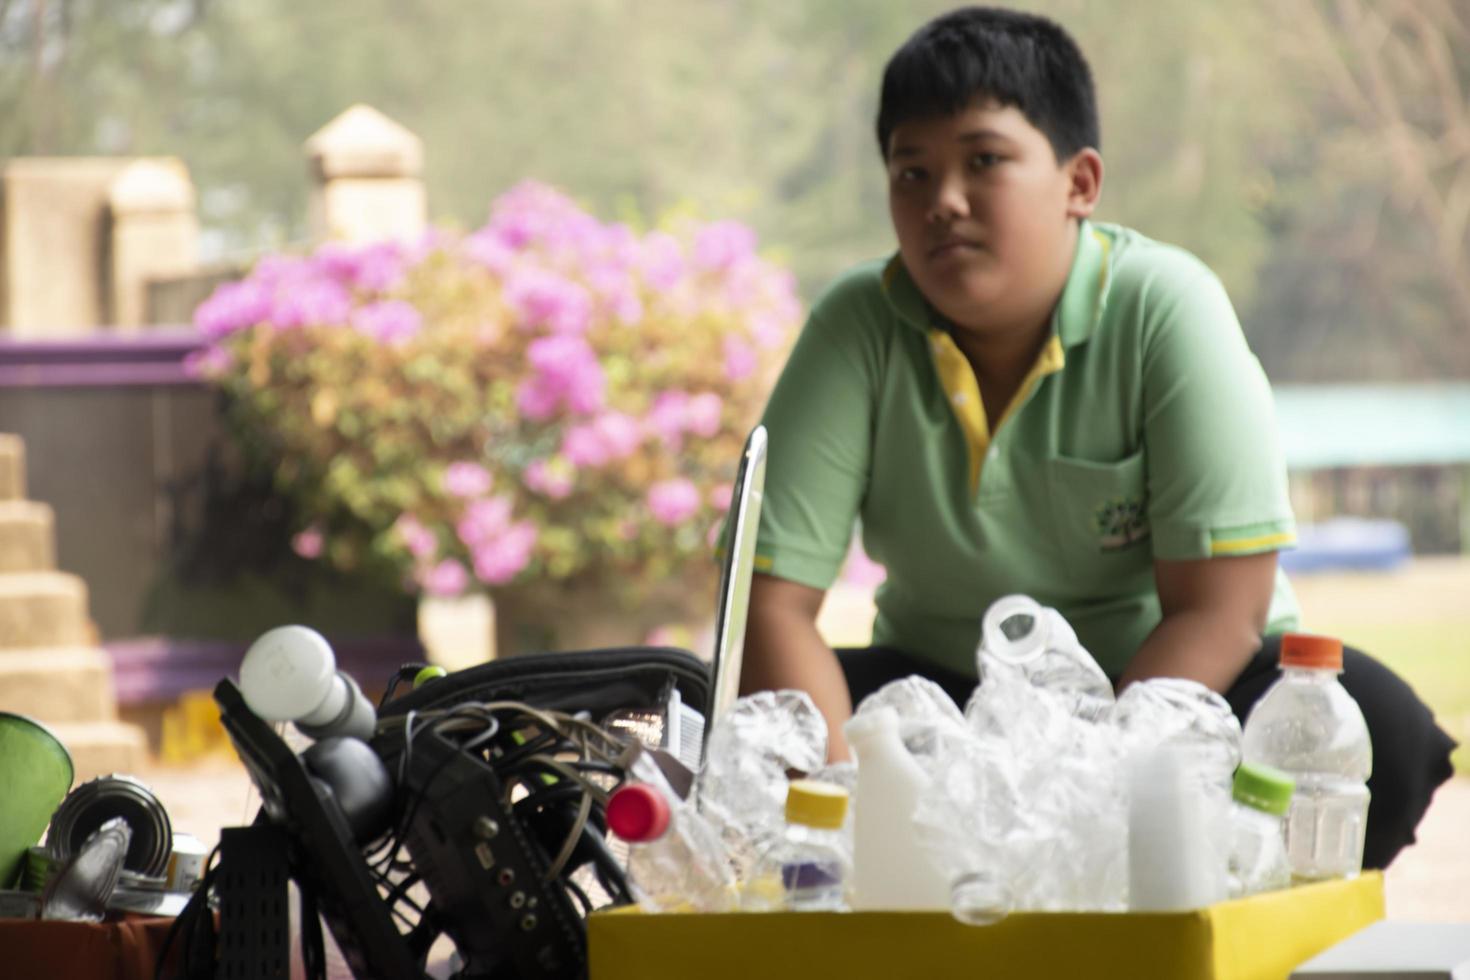 Asian boy in green t-shirt is separating different types of trash into color-coded boxes in the back of a pickup truck before leading them to sell and generate income after their school holidays. photo